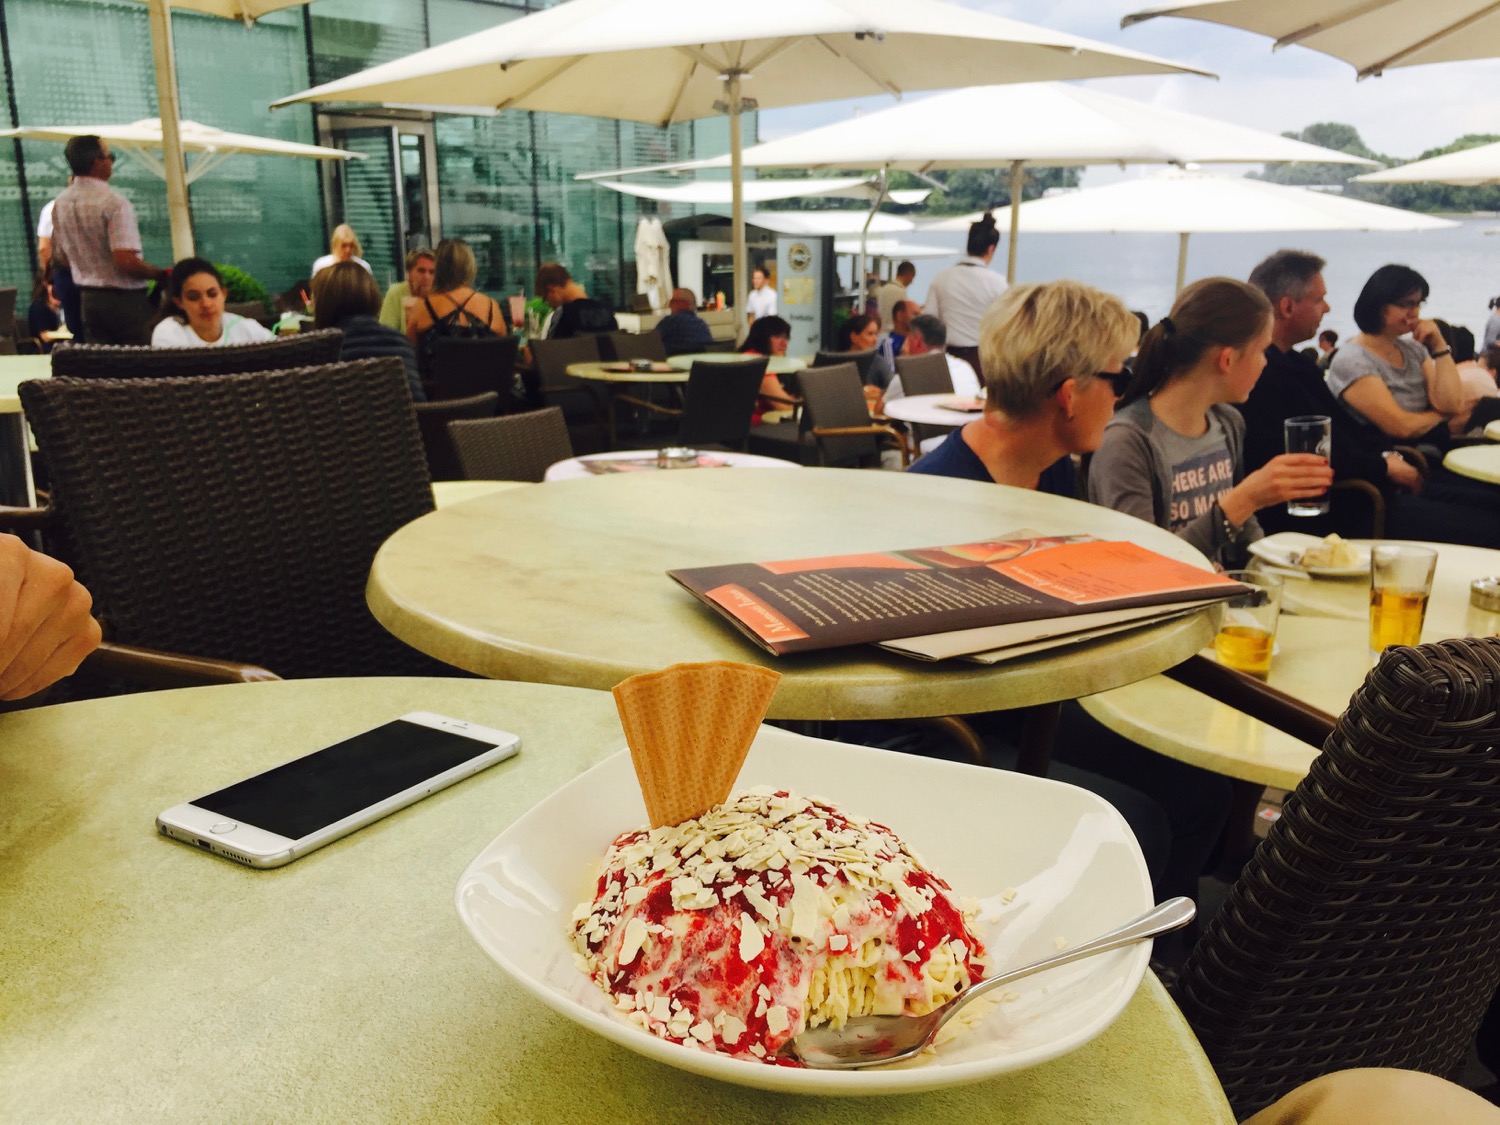 a plate of ice cream on a table with people sitting at tables